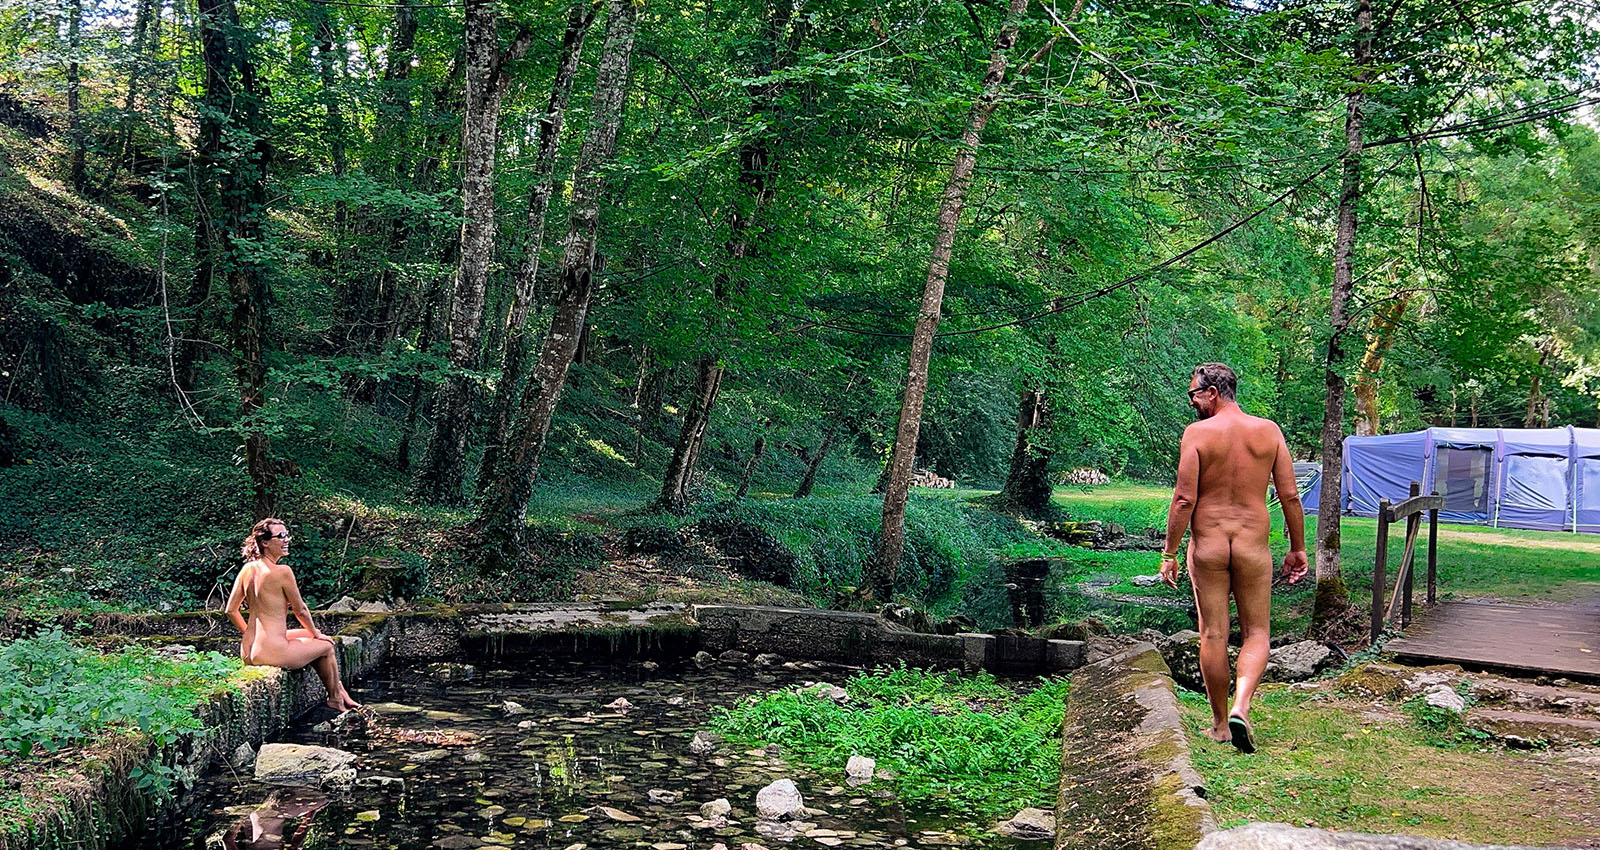 What to pack for a naturist camping trip